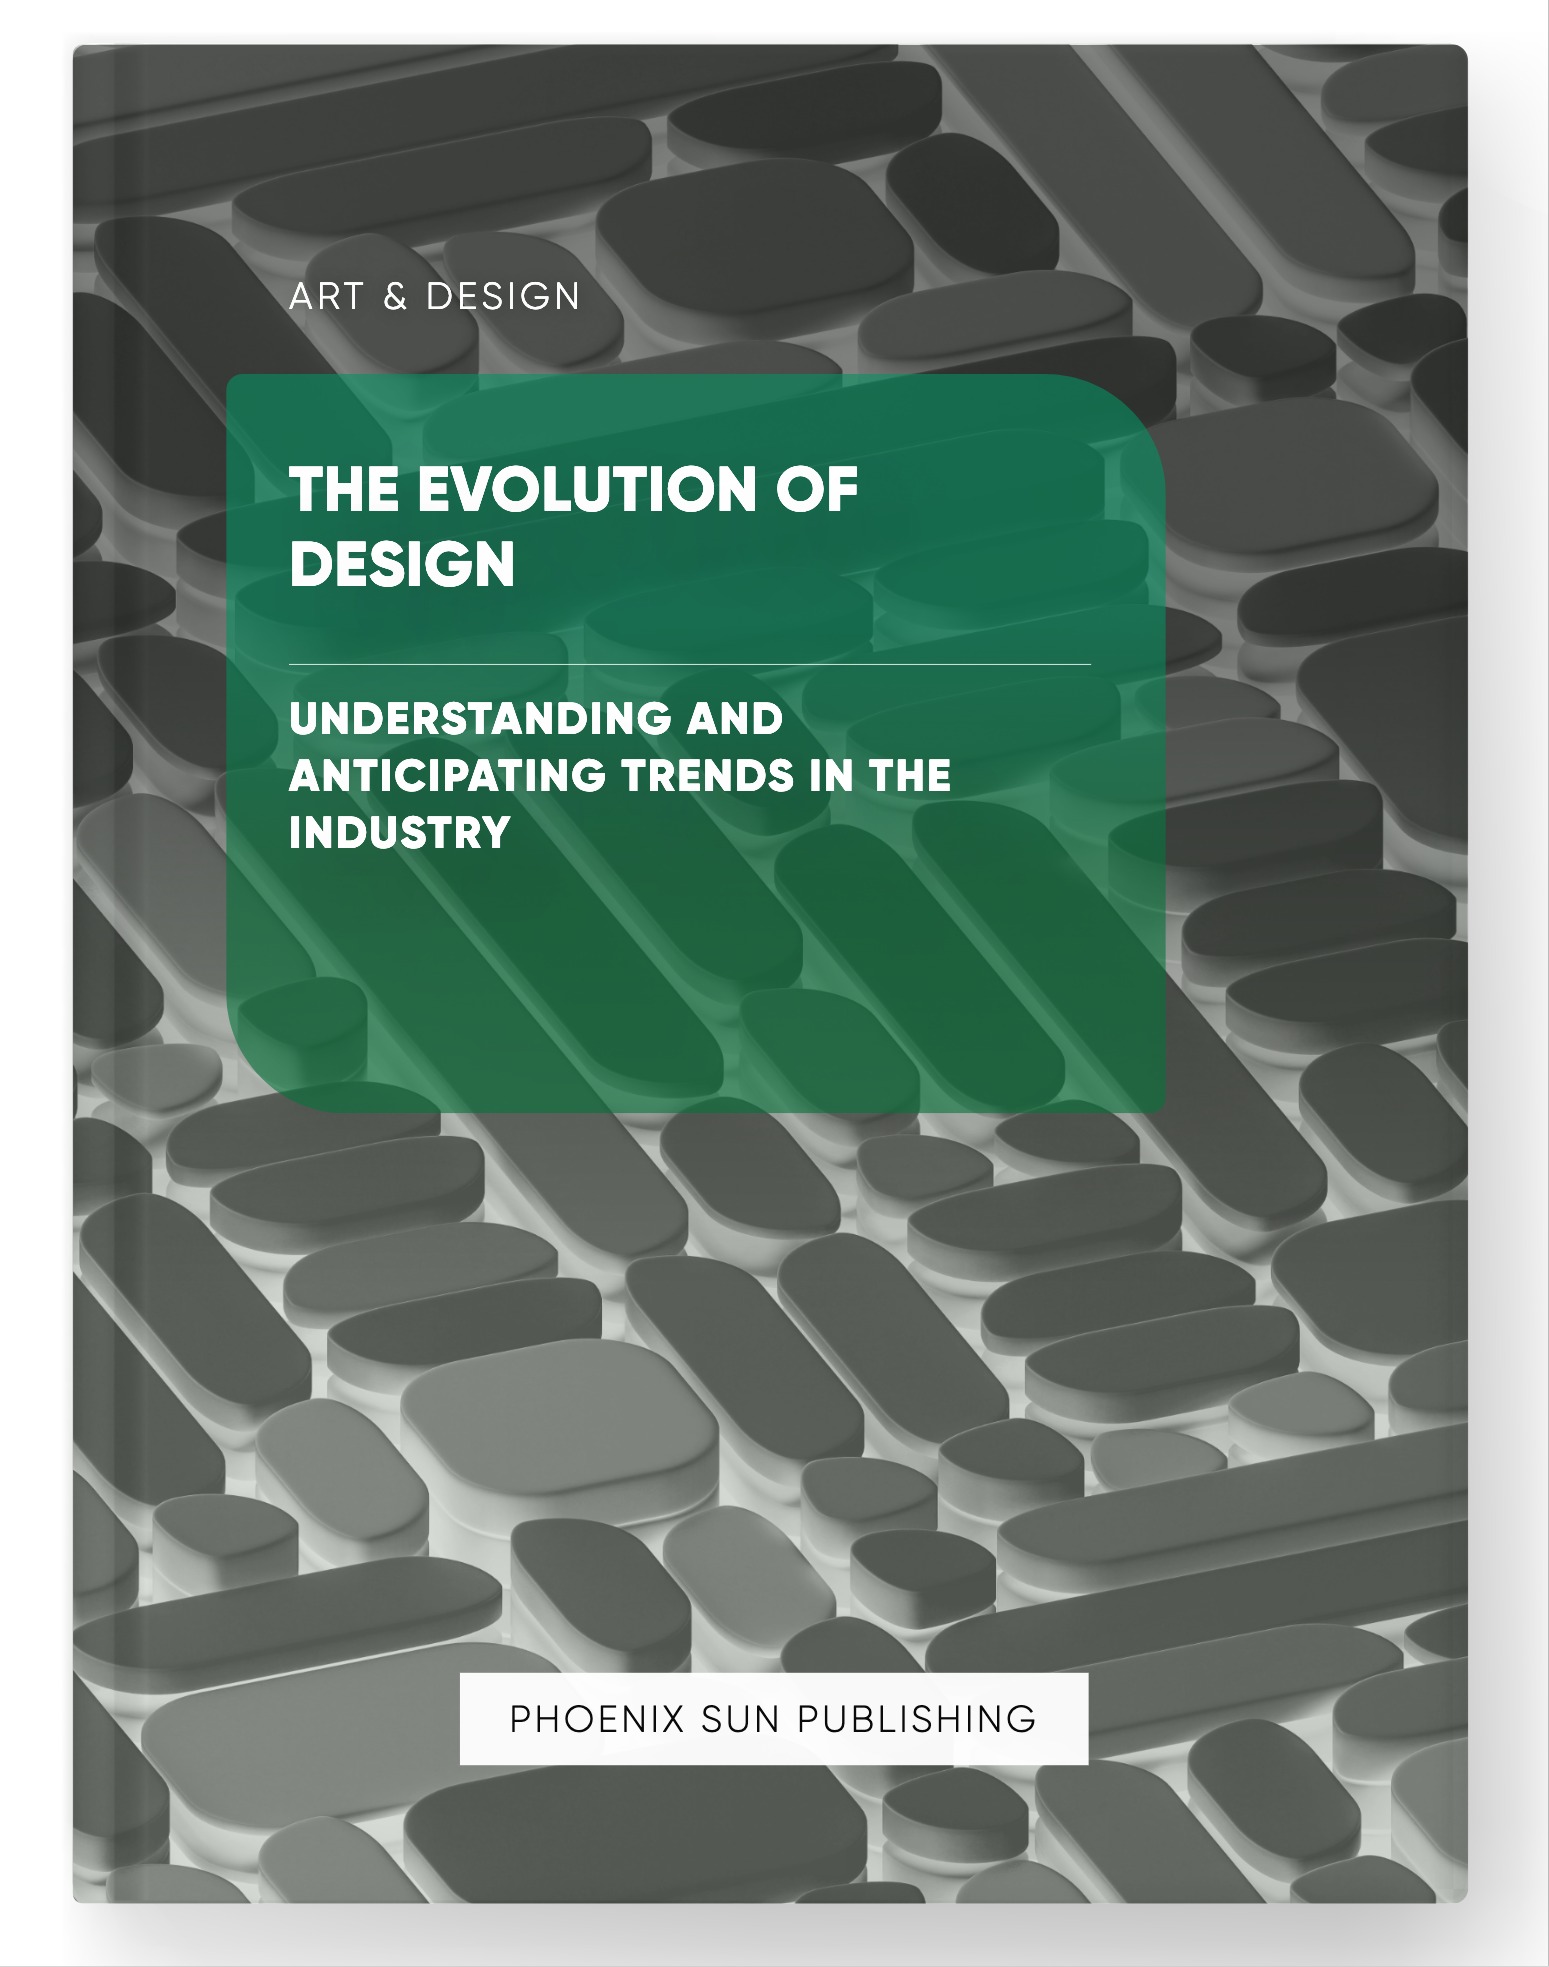 The Evolution of Design – Understanding and Anticipating Trends in the Industry